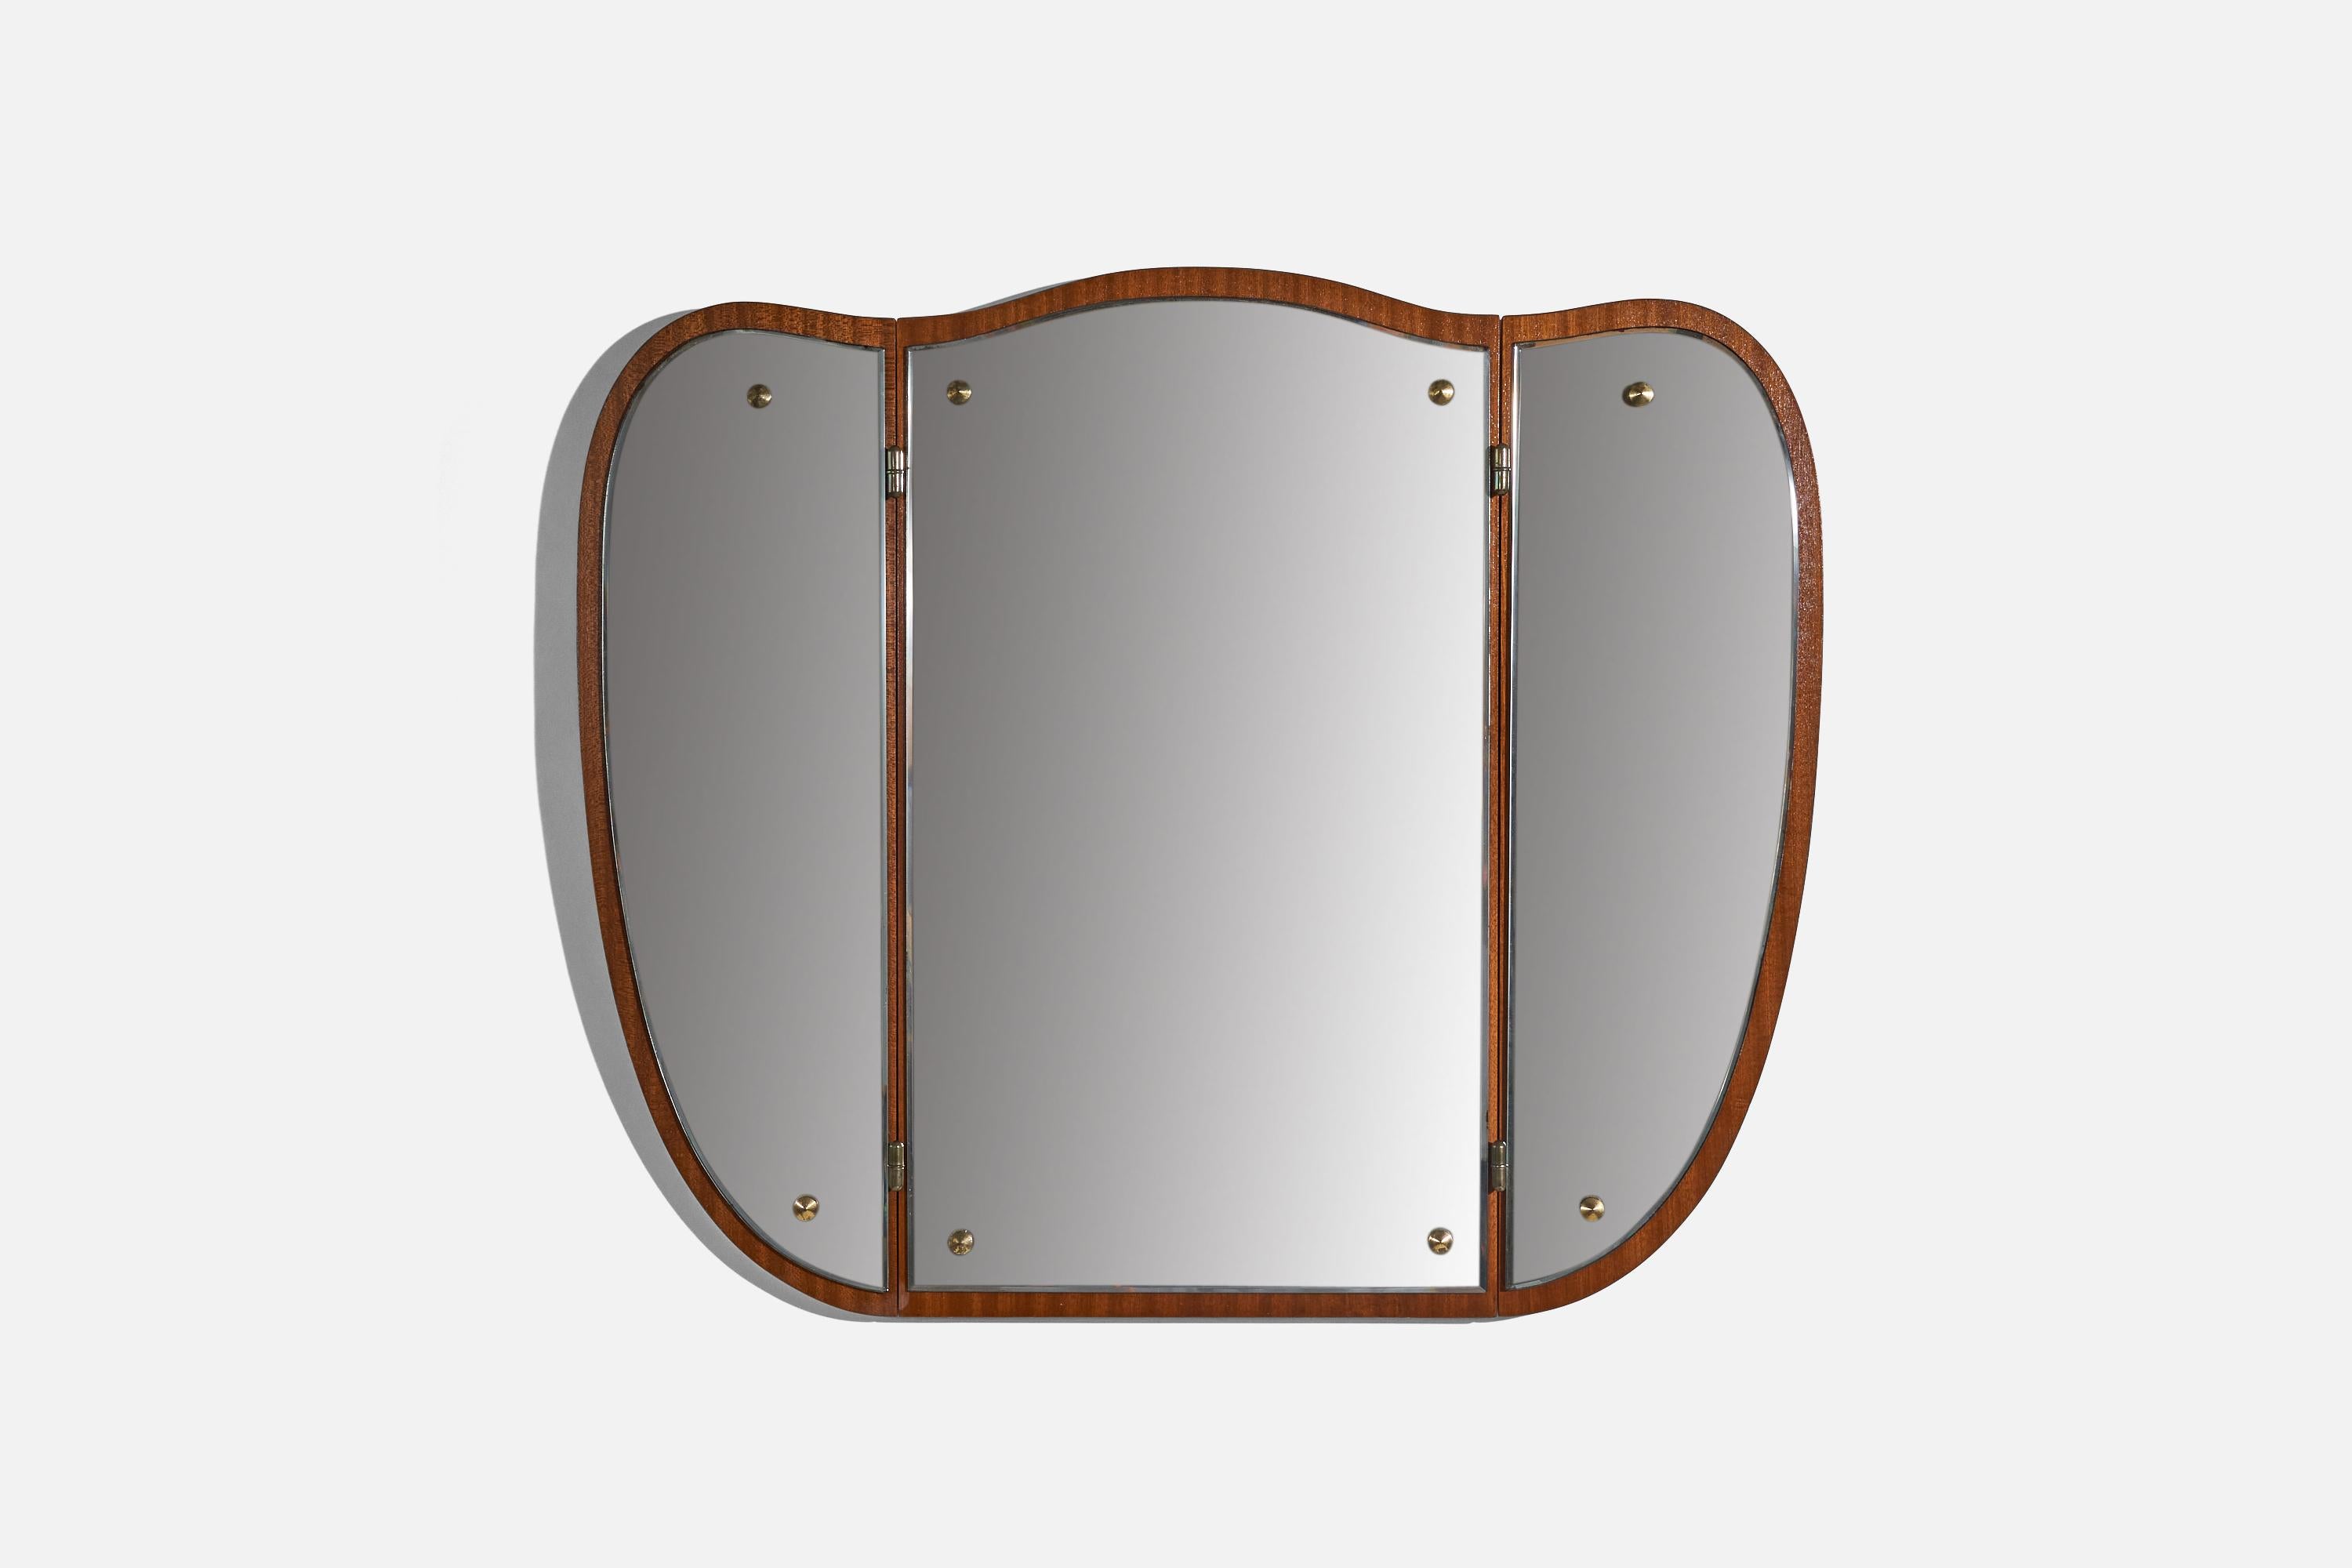 A three part wooden wall mirror designed and produced in Italy, c. 1950s.
 